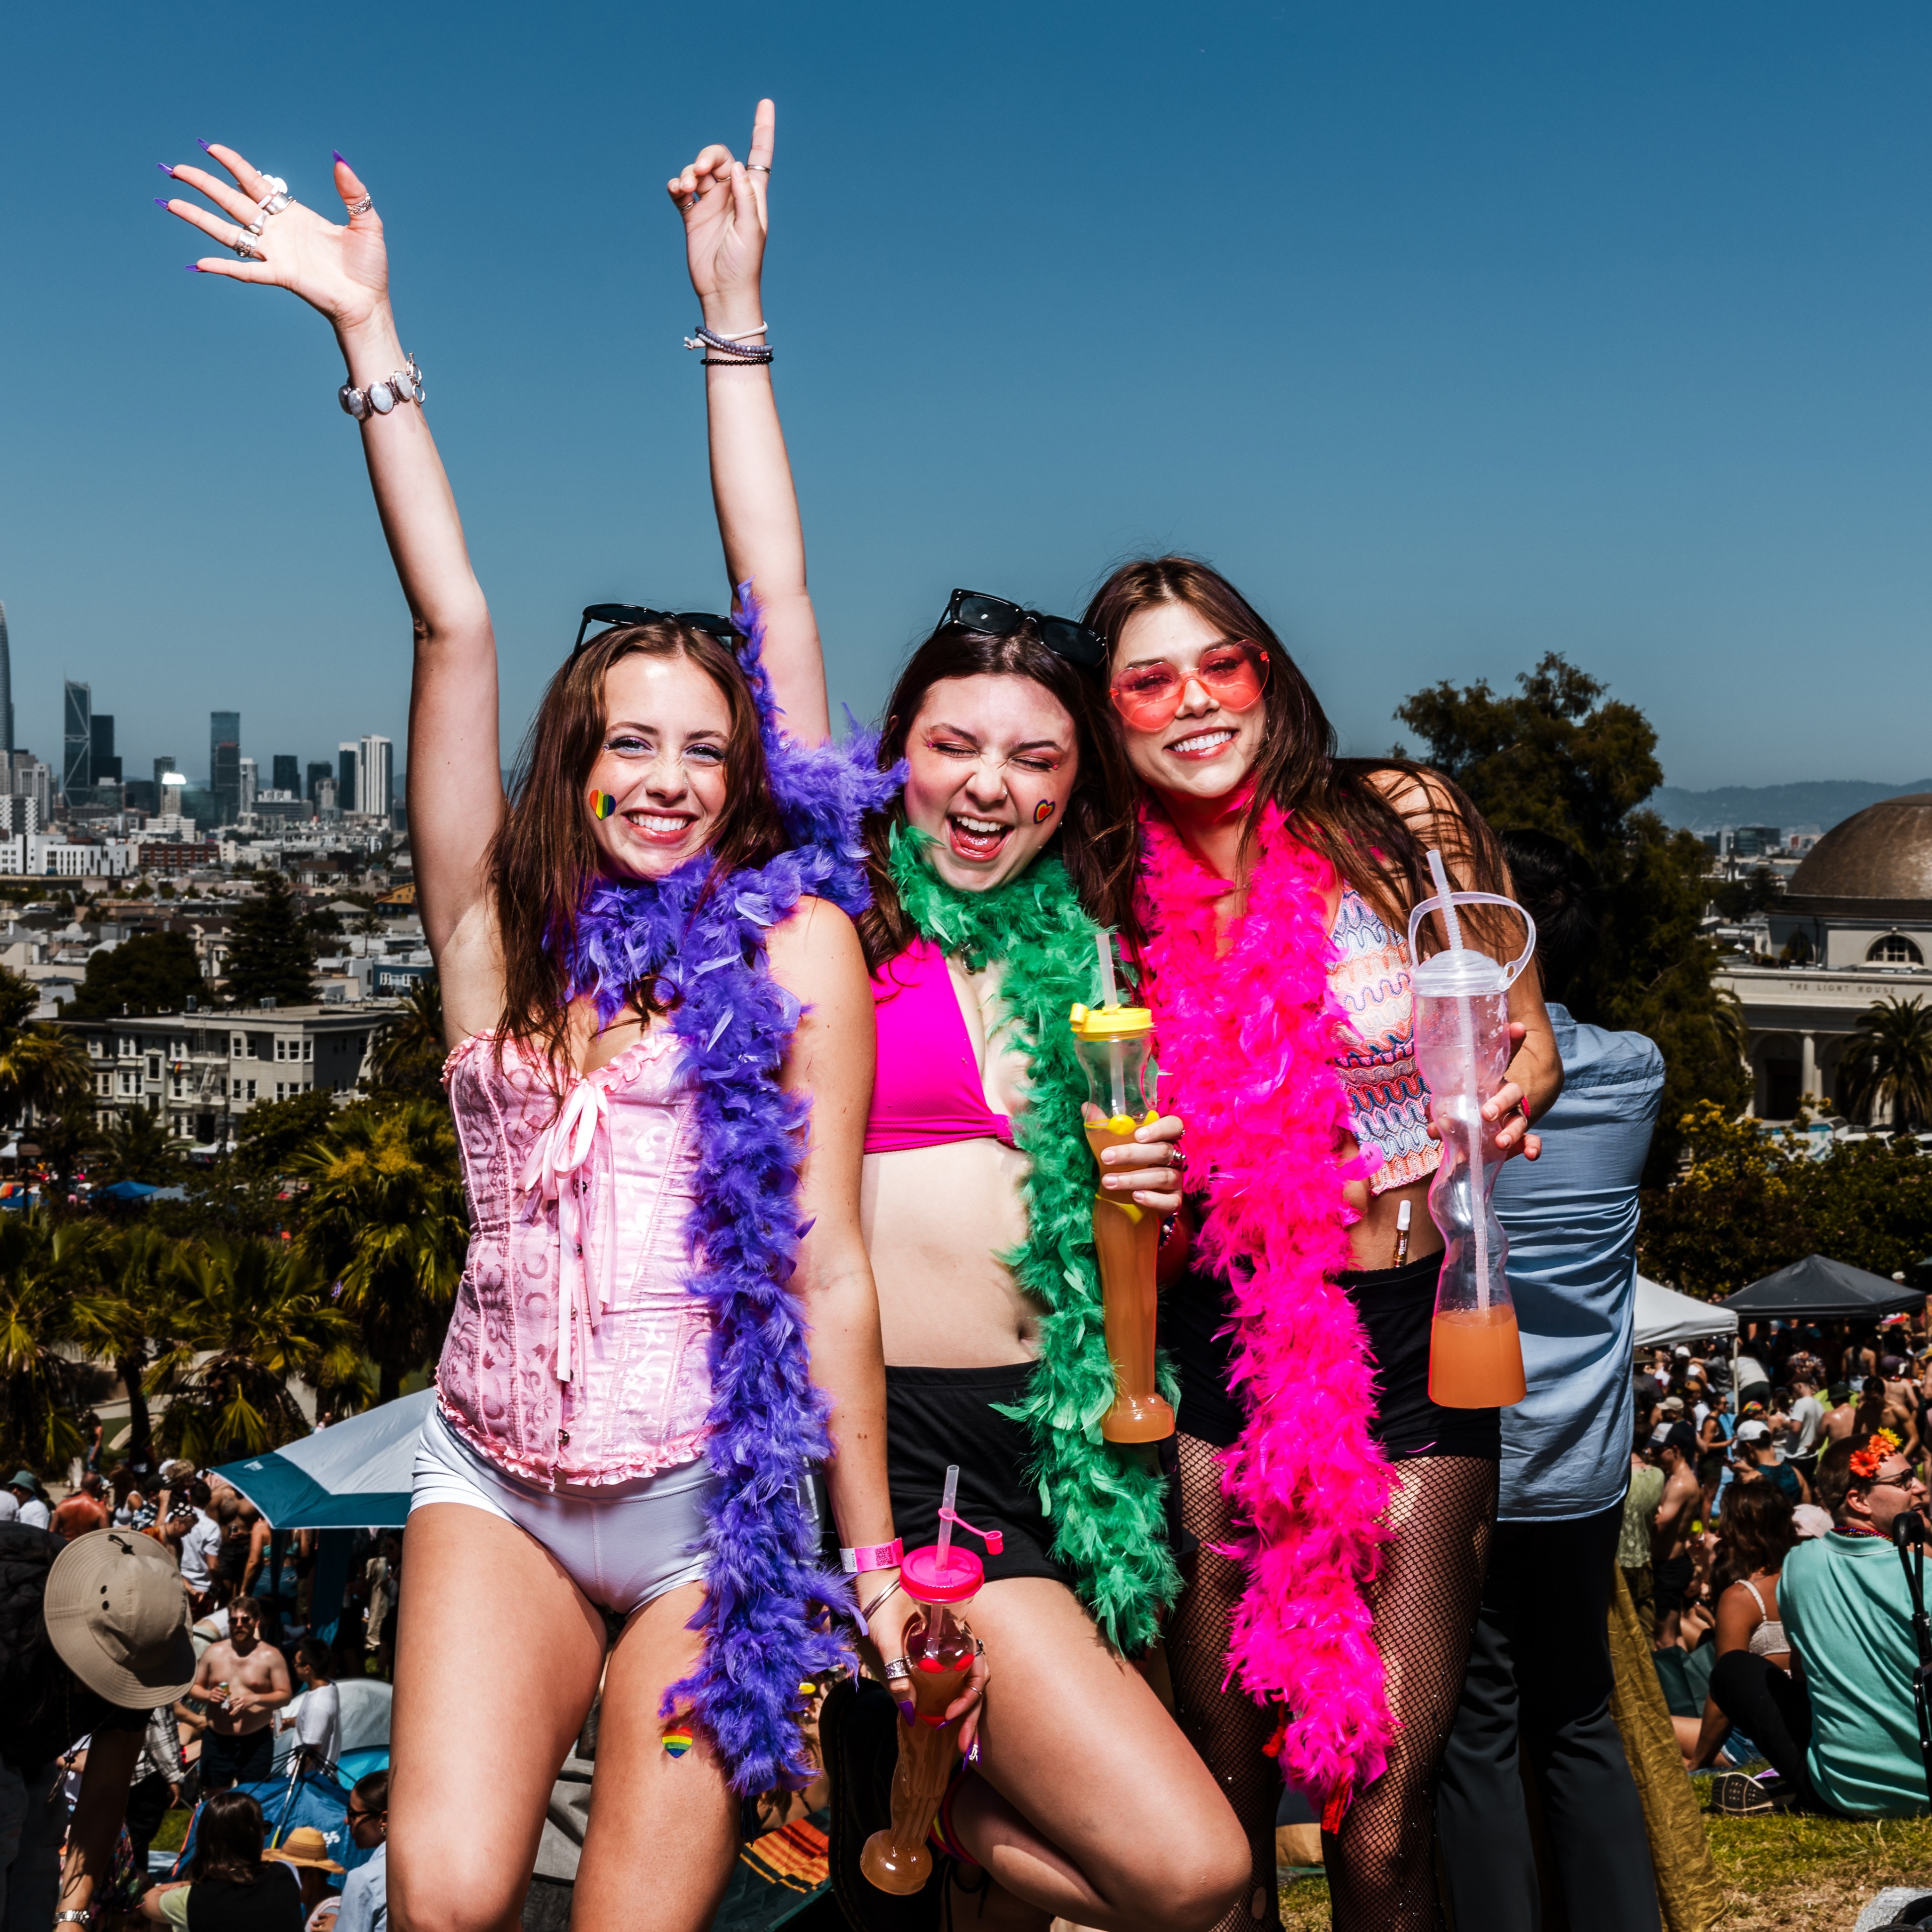 Three women wearing colorful feather boas and festival outfits pose cheerfully with drinks in hand at an outdoor event, with a cityscape in the background.